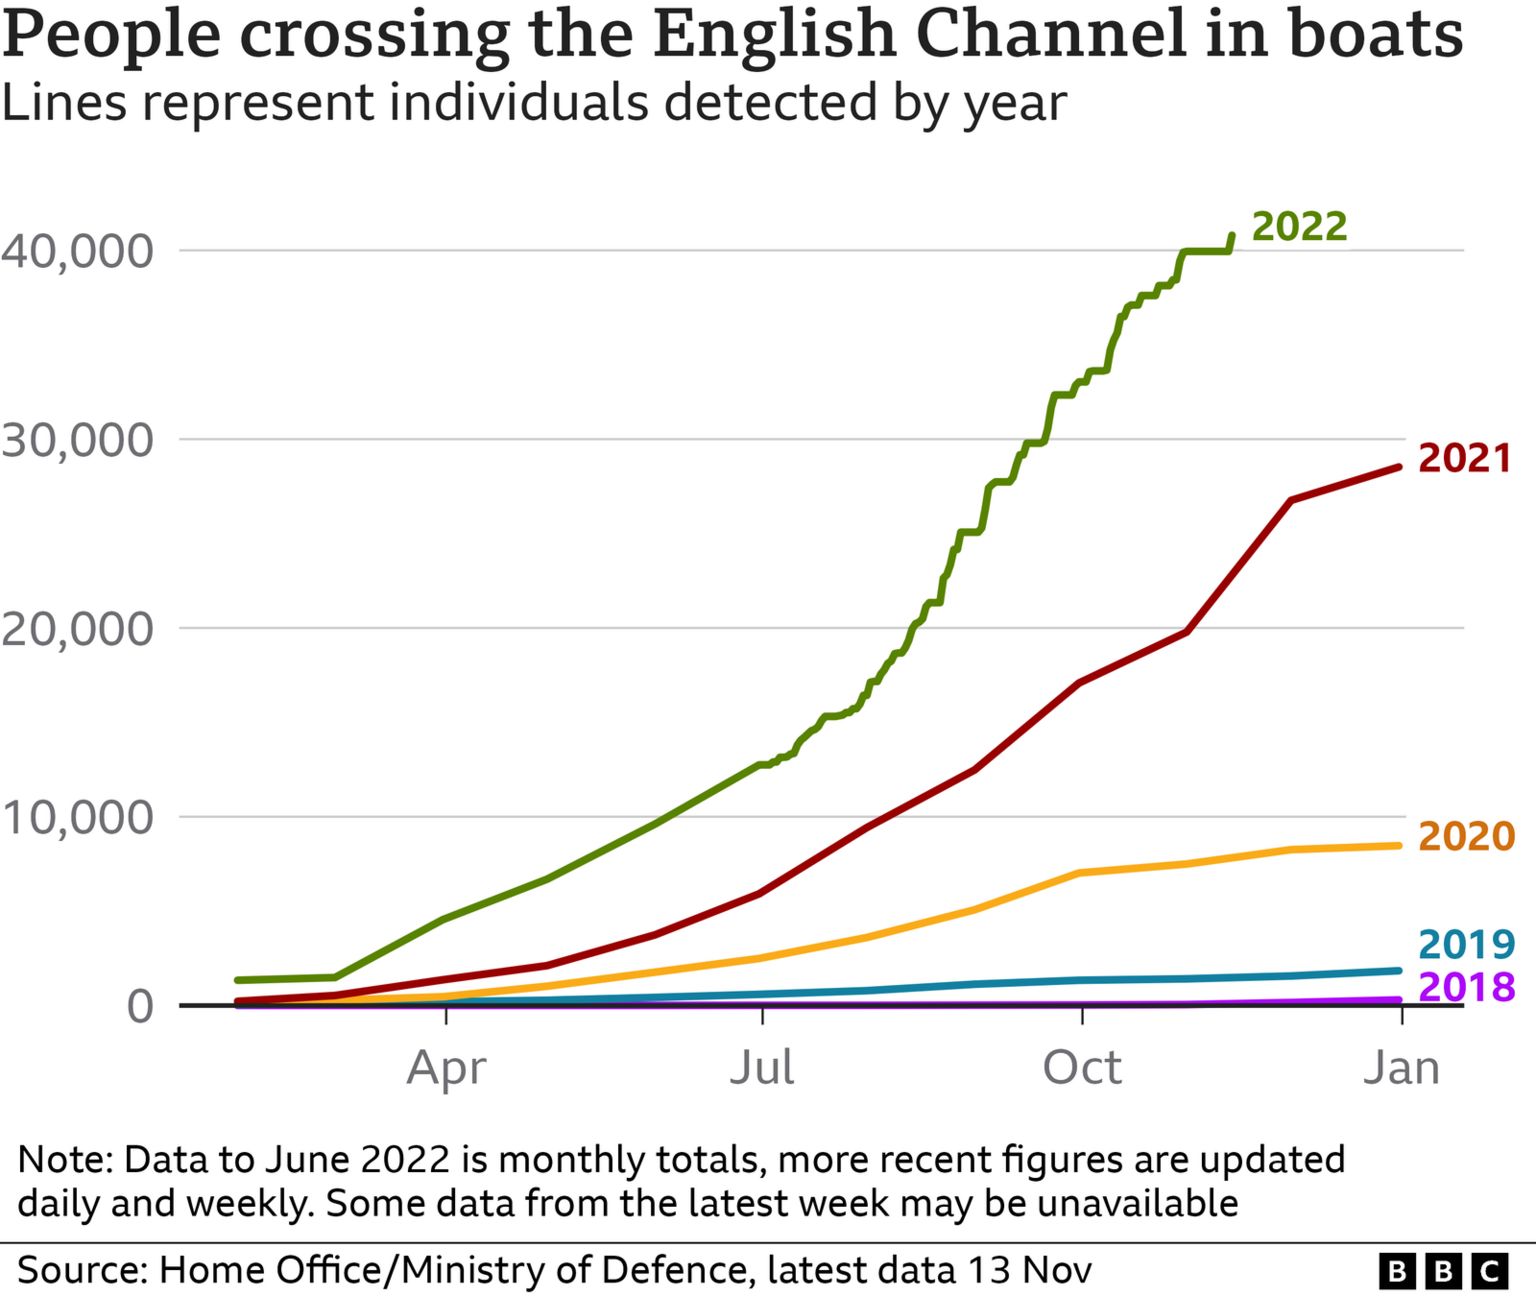 Graphic showing the number of Channel crossings